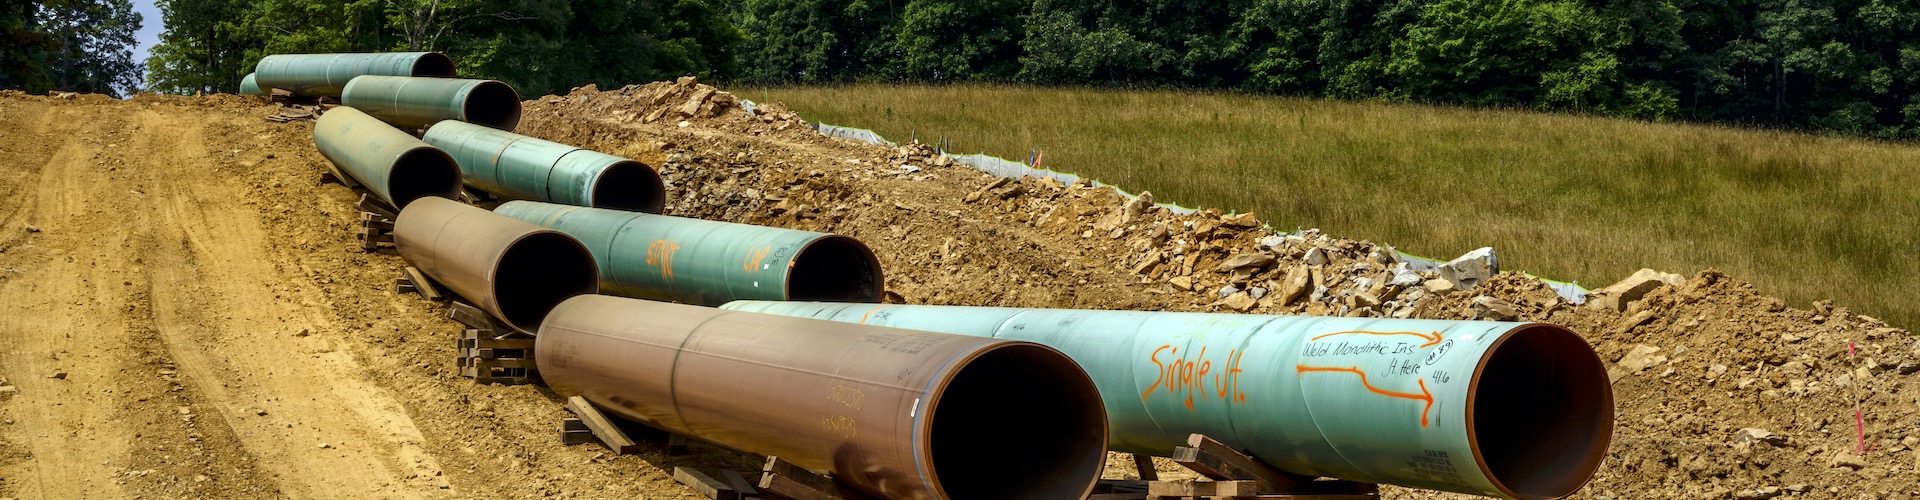 pipes to build the Mountain Valley Pipeline